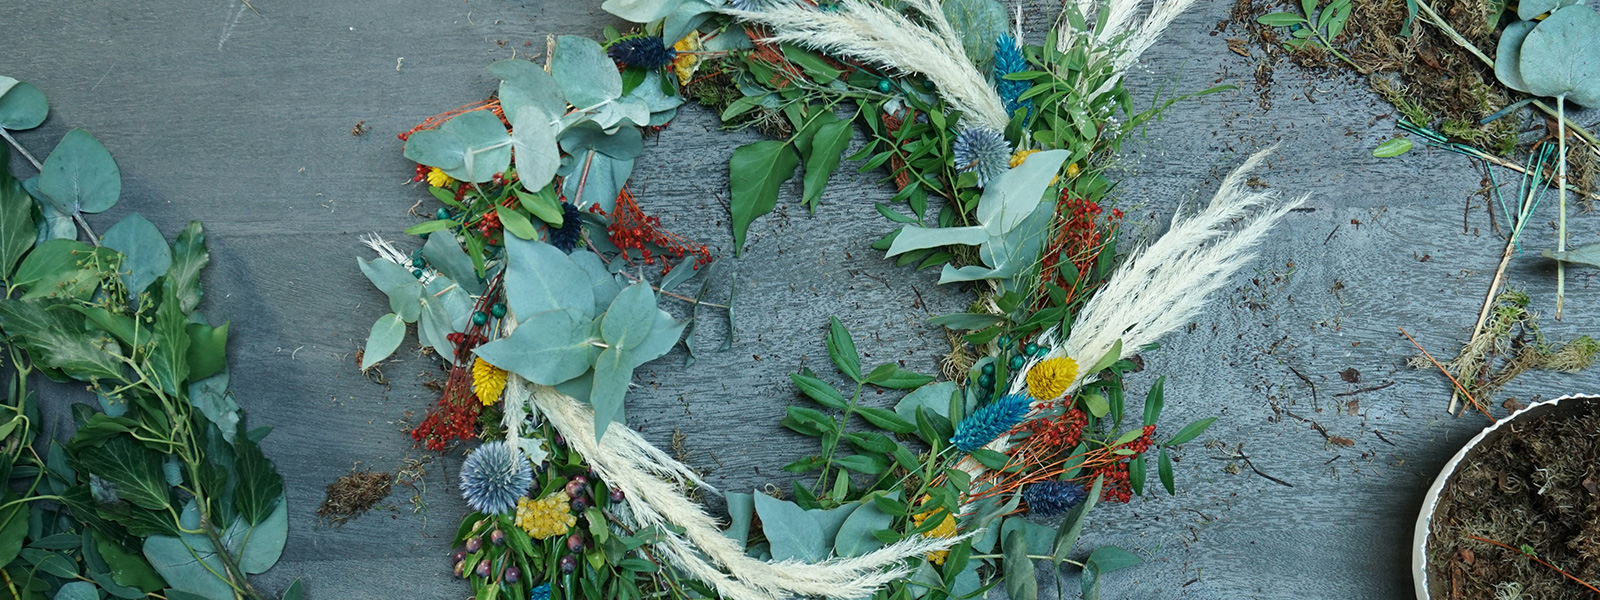 Festive Wreath Making with Sofology